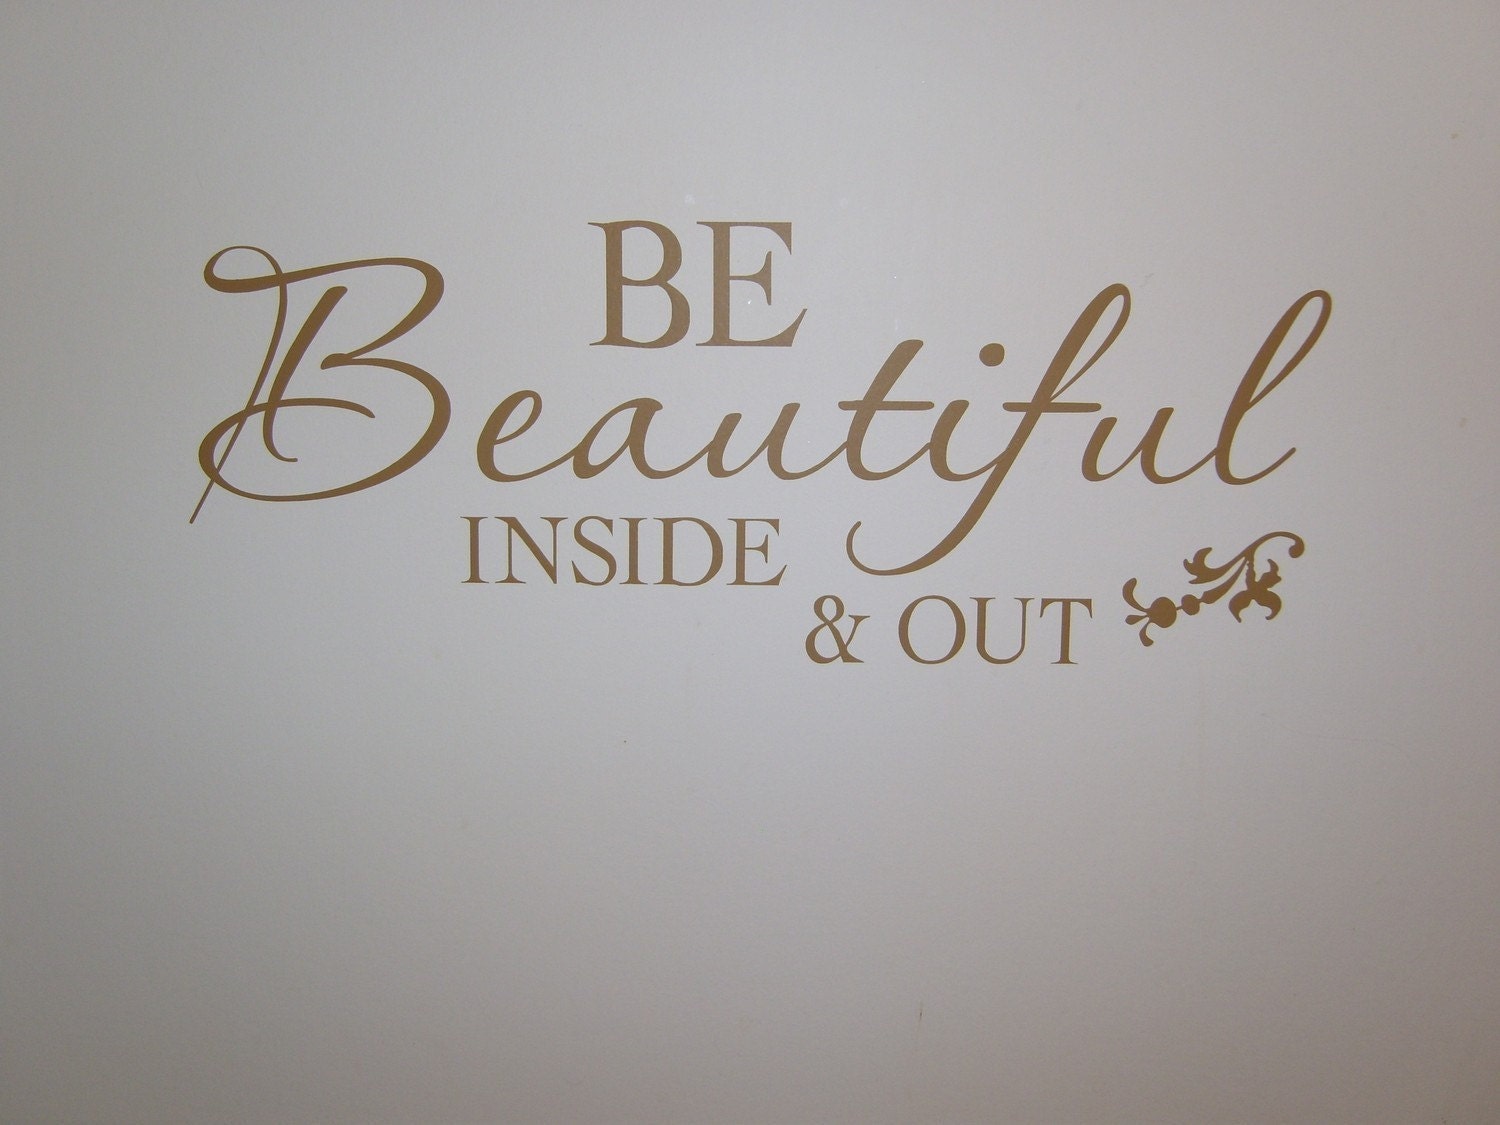 Be beautiful inside and outbathroomvinyl by jkvinyldesigns